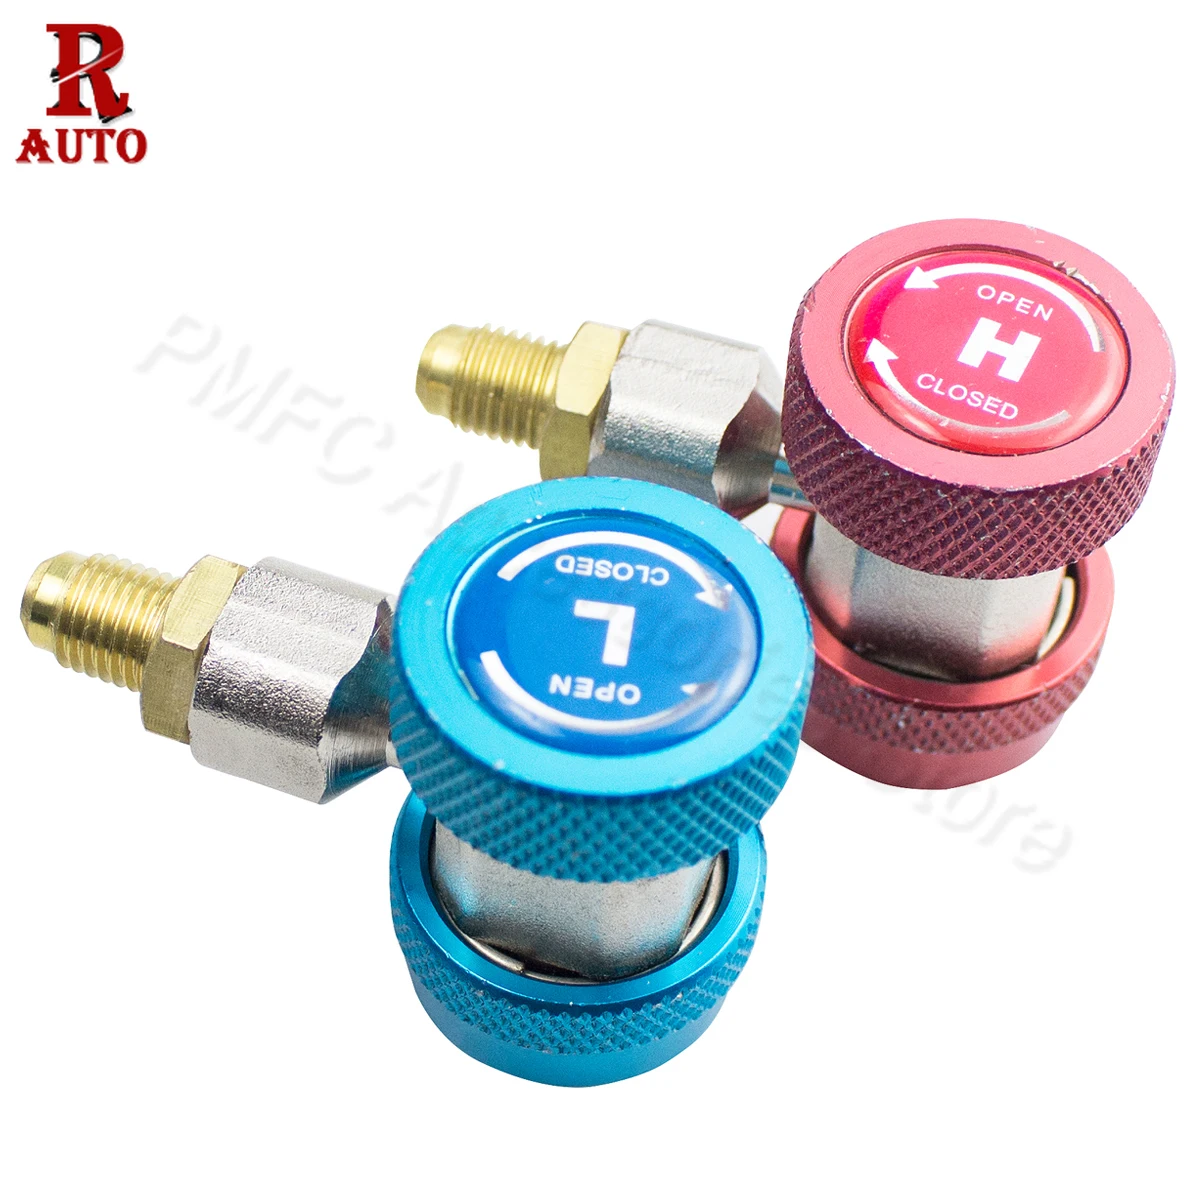 

R-AUTO 1 Pair High Low Connector Manifold Adapter R134A AC Air Condition Adjustable Quick Coupler Refrigerant Manifold Gauge Set